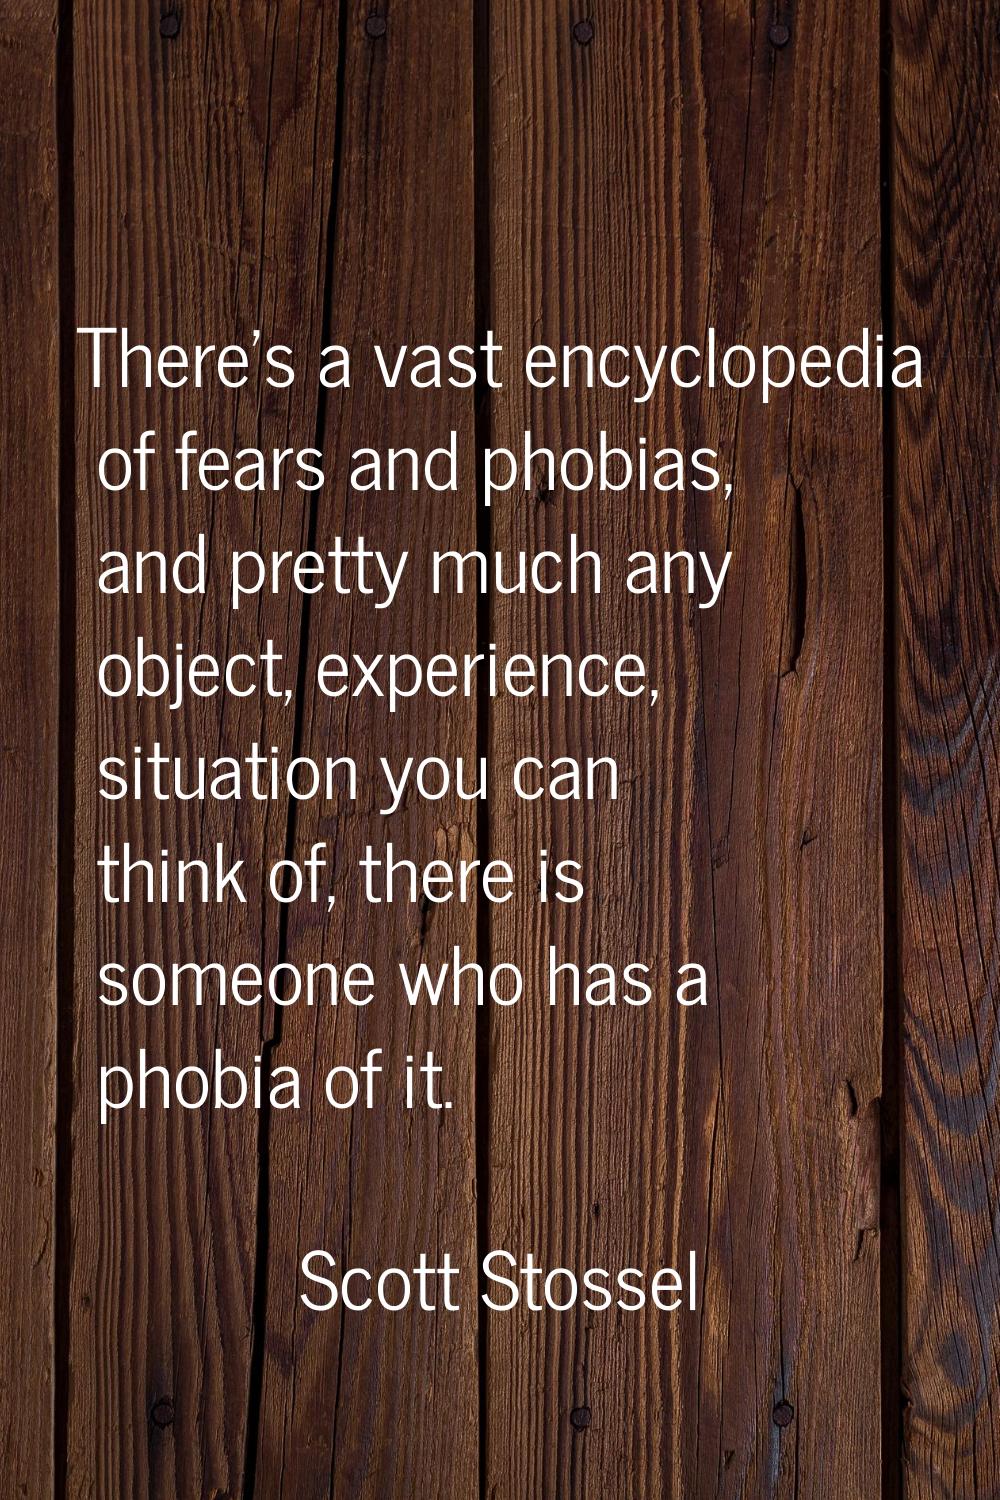 There's a vast encyclopedia of fears and phobias, and pretty much any object, experience, situation